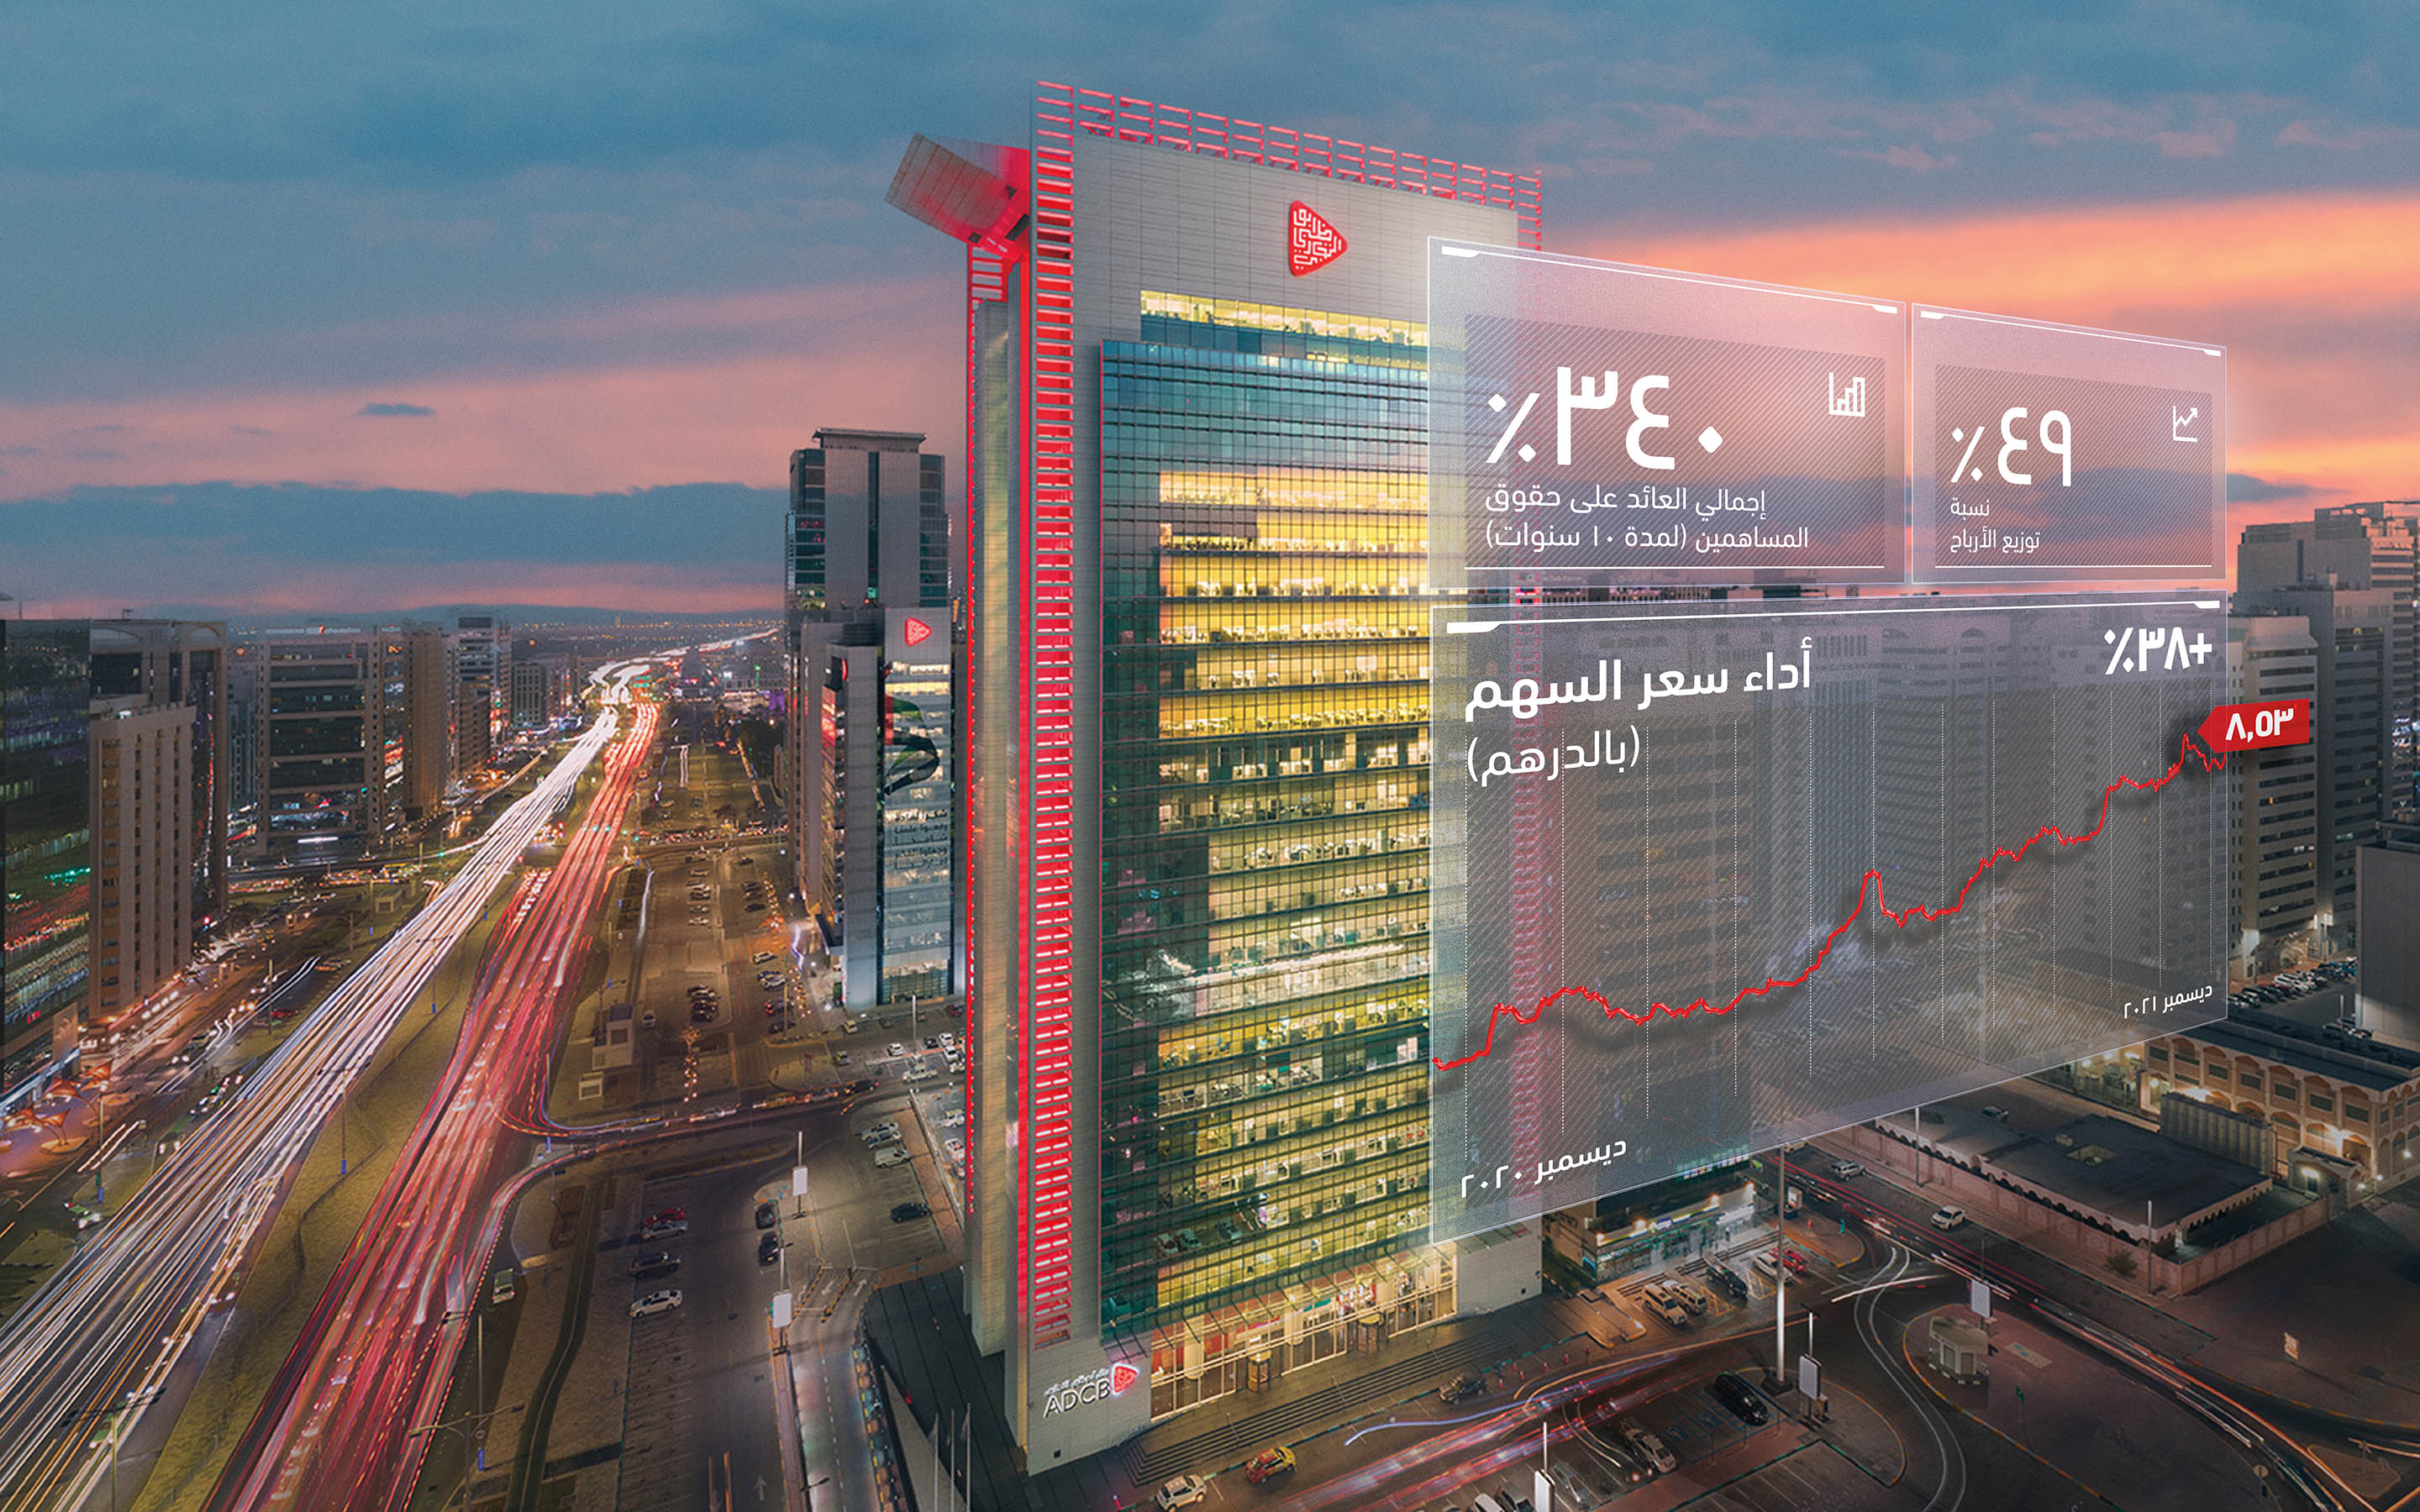 ADCB building with an overlaying graphic of Share Price Performance.